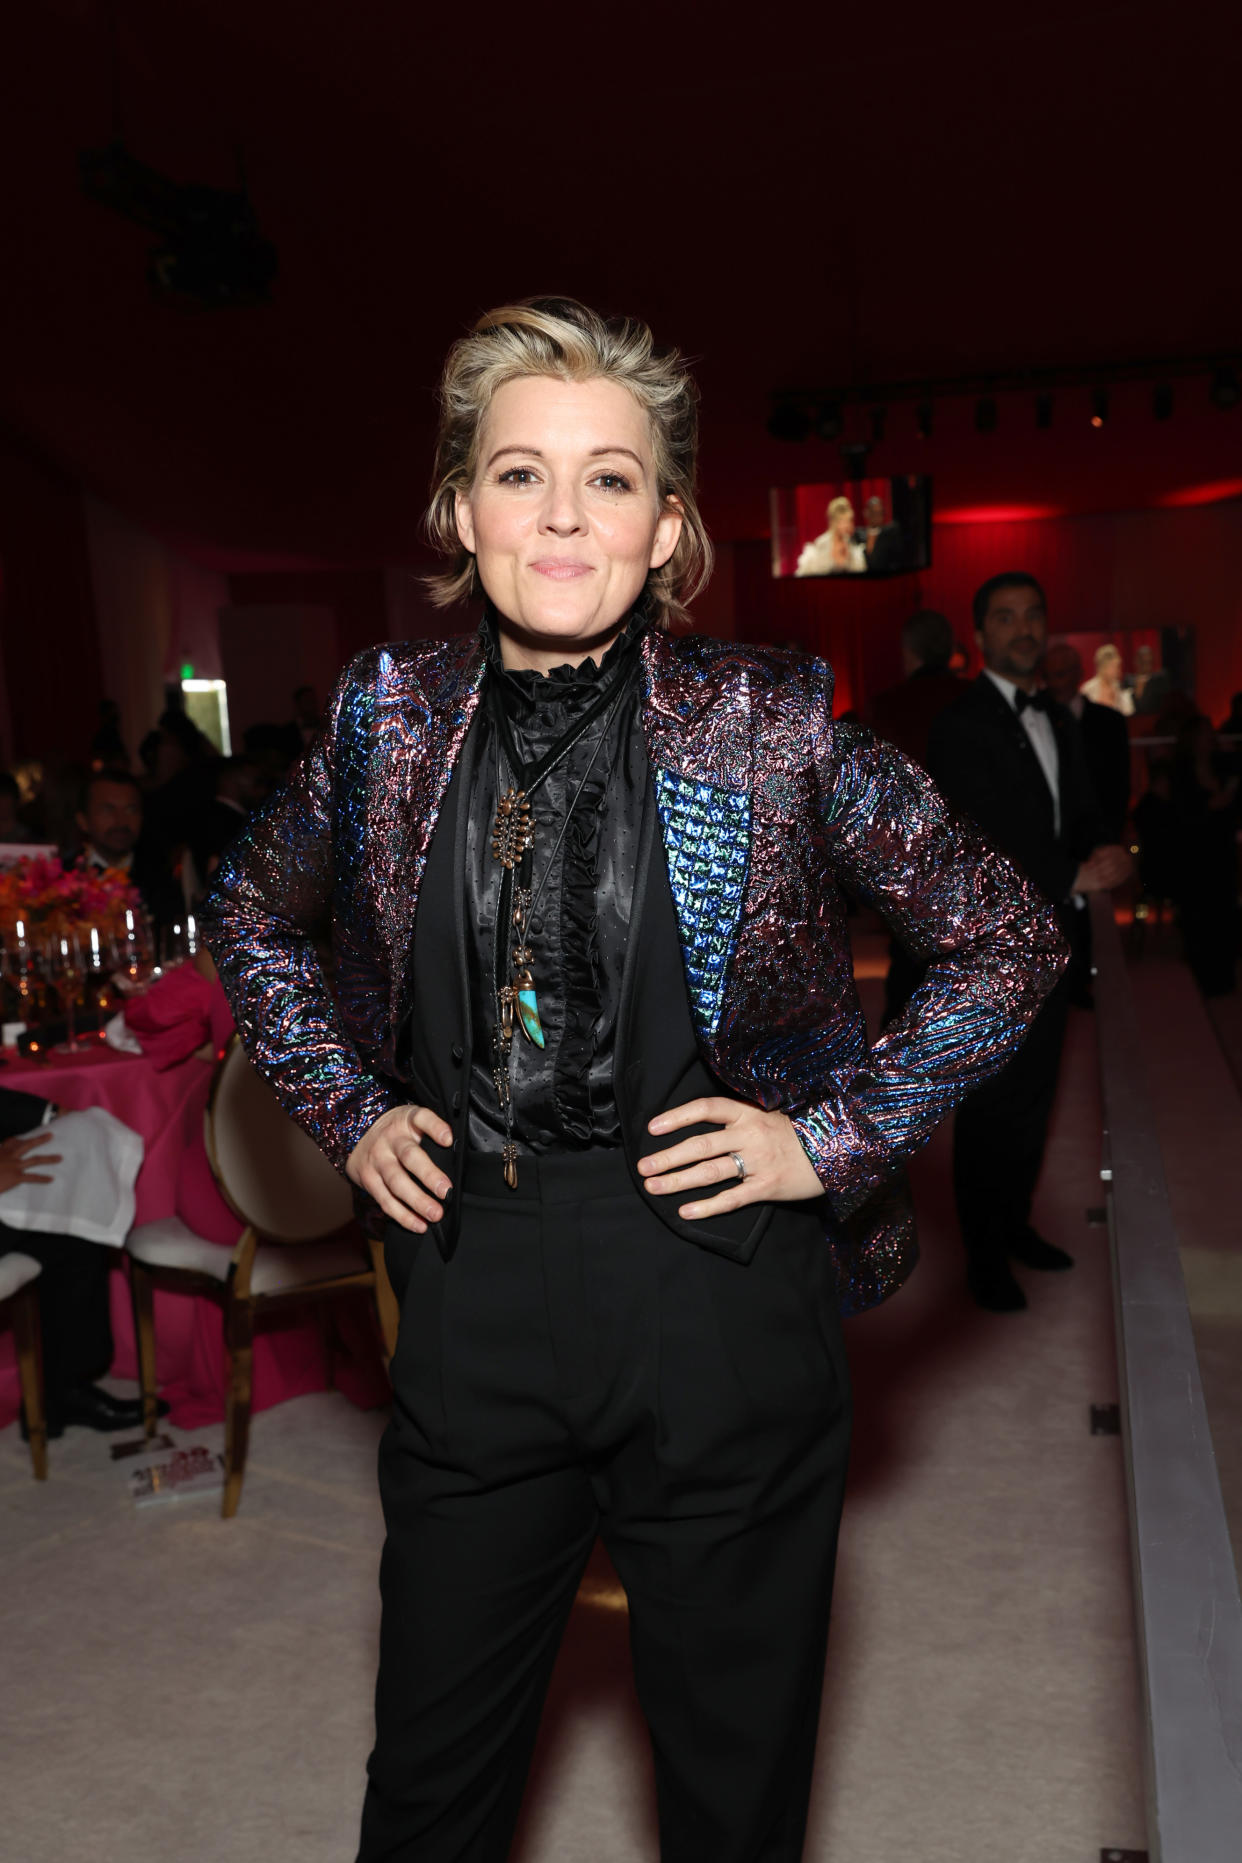 Brandi Carlile attends the Elton John AIDS Foundation's 30th Annual Academy Awards Viewing Party on March 27, 2022 in West Hollywood, California. (Photo: Amy Sussman/Getty Images for Elton John AIDS Foundation)